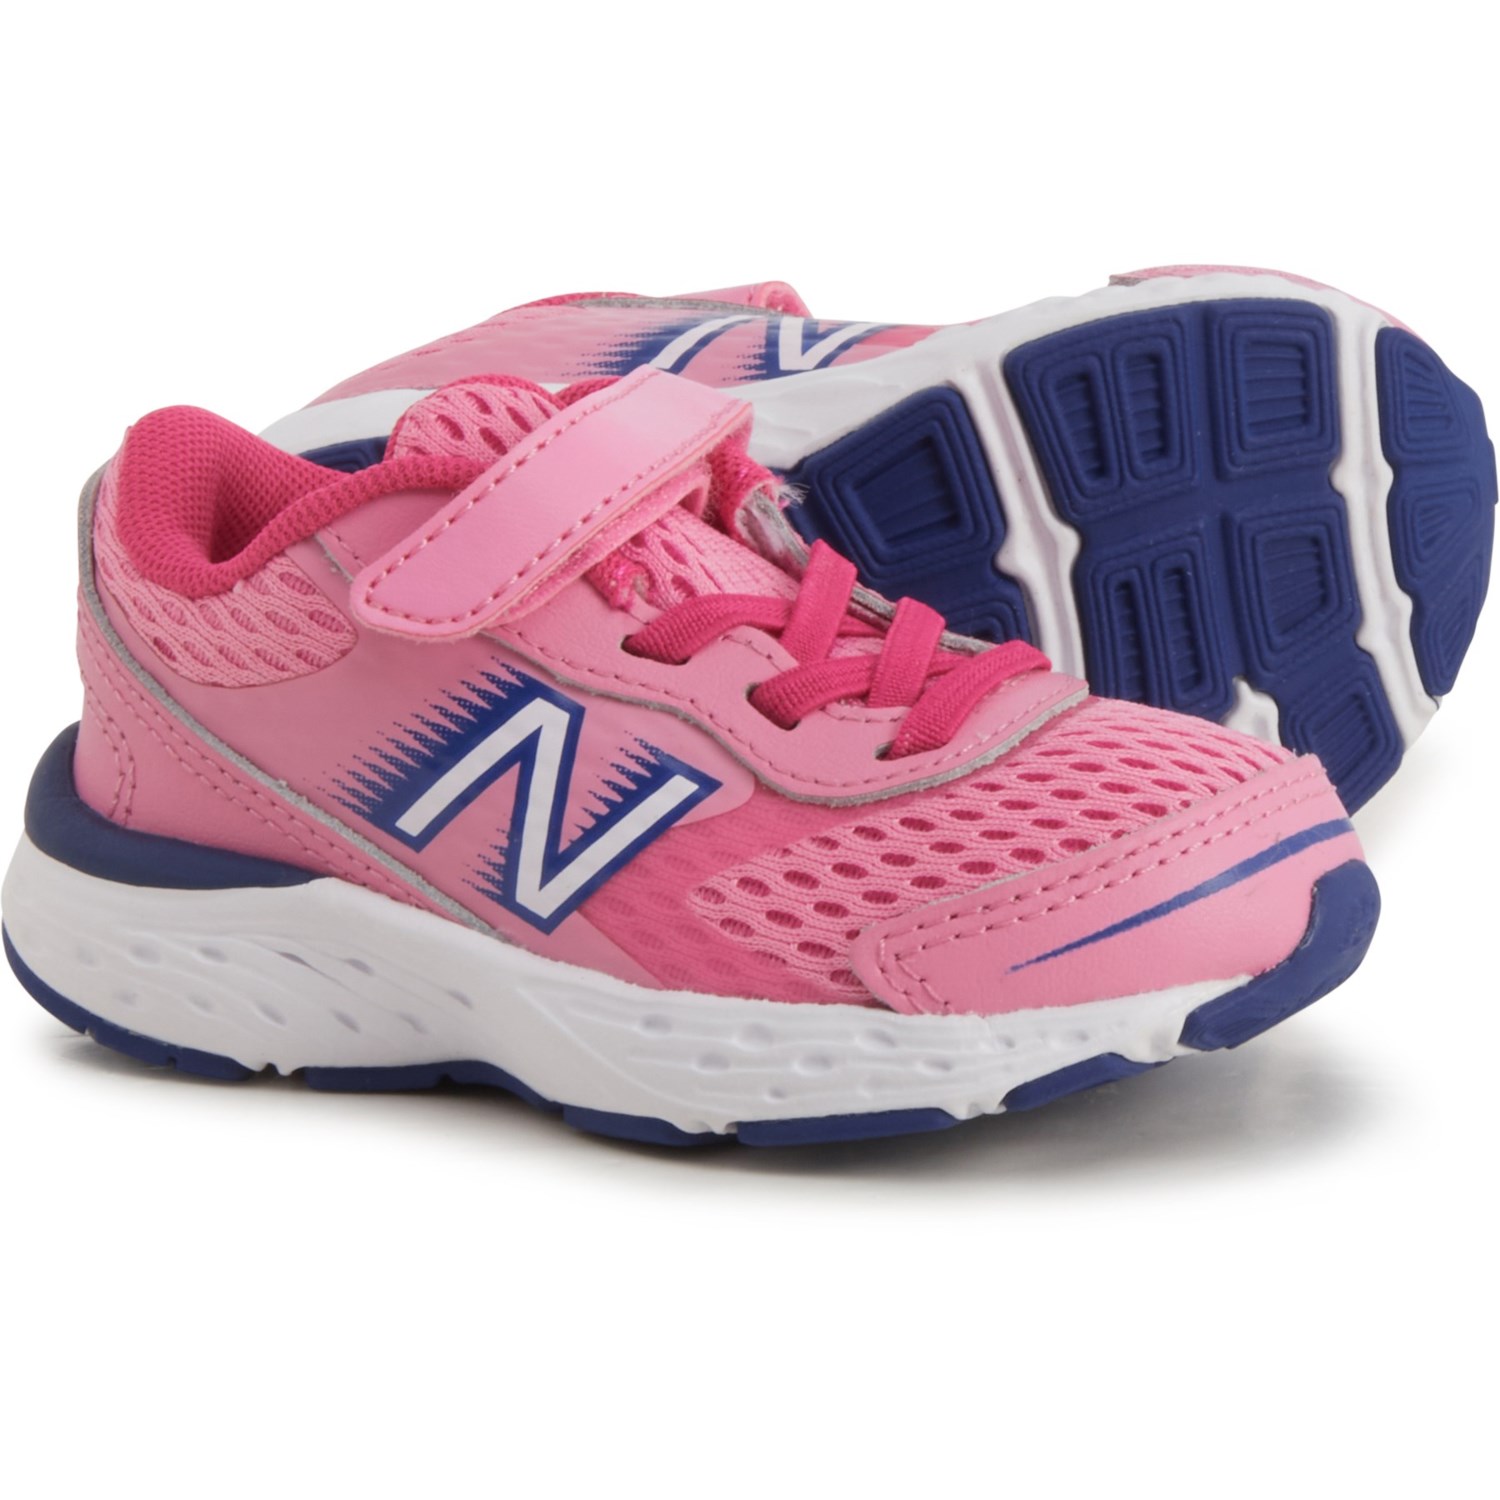 New Balance 680 Running Shoes (For Toddler Girls)